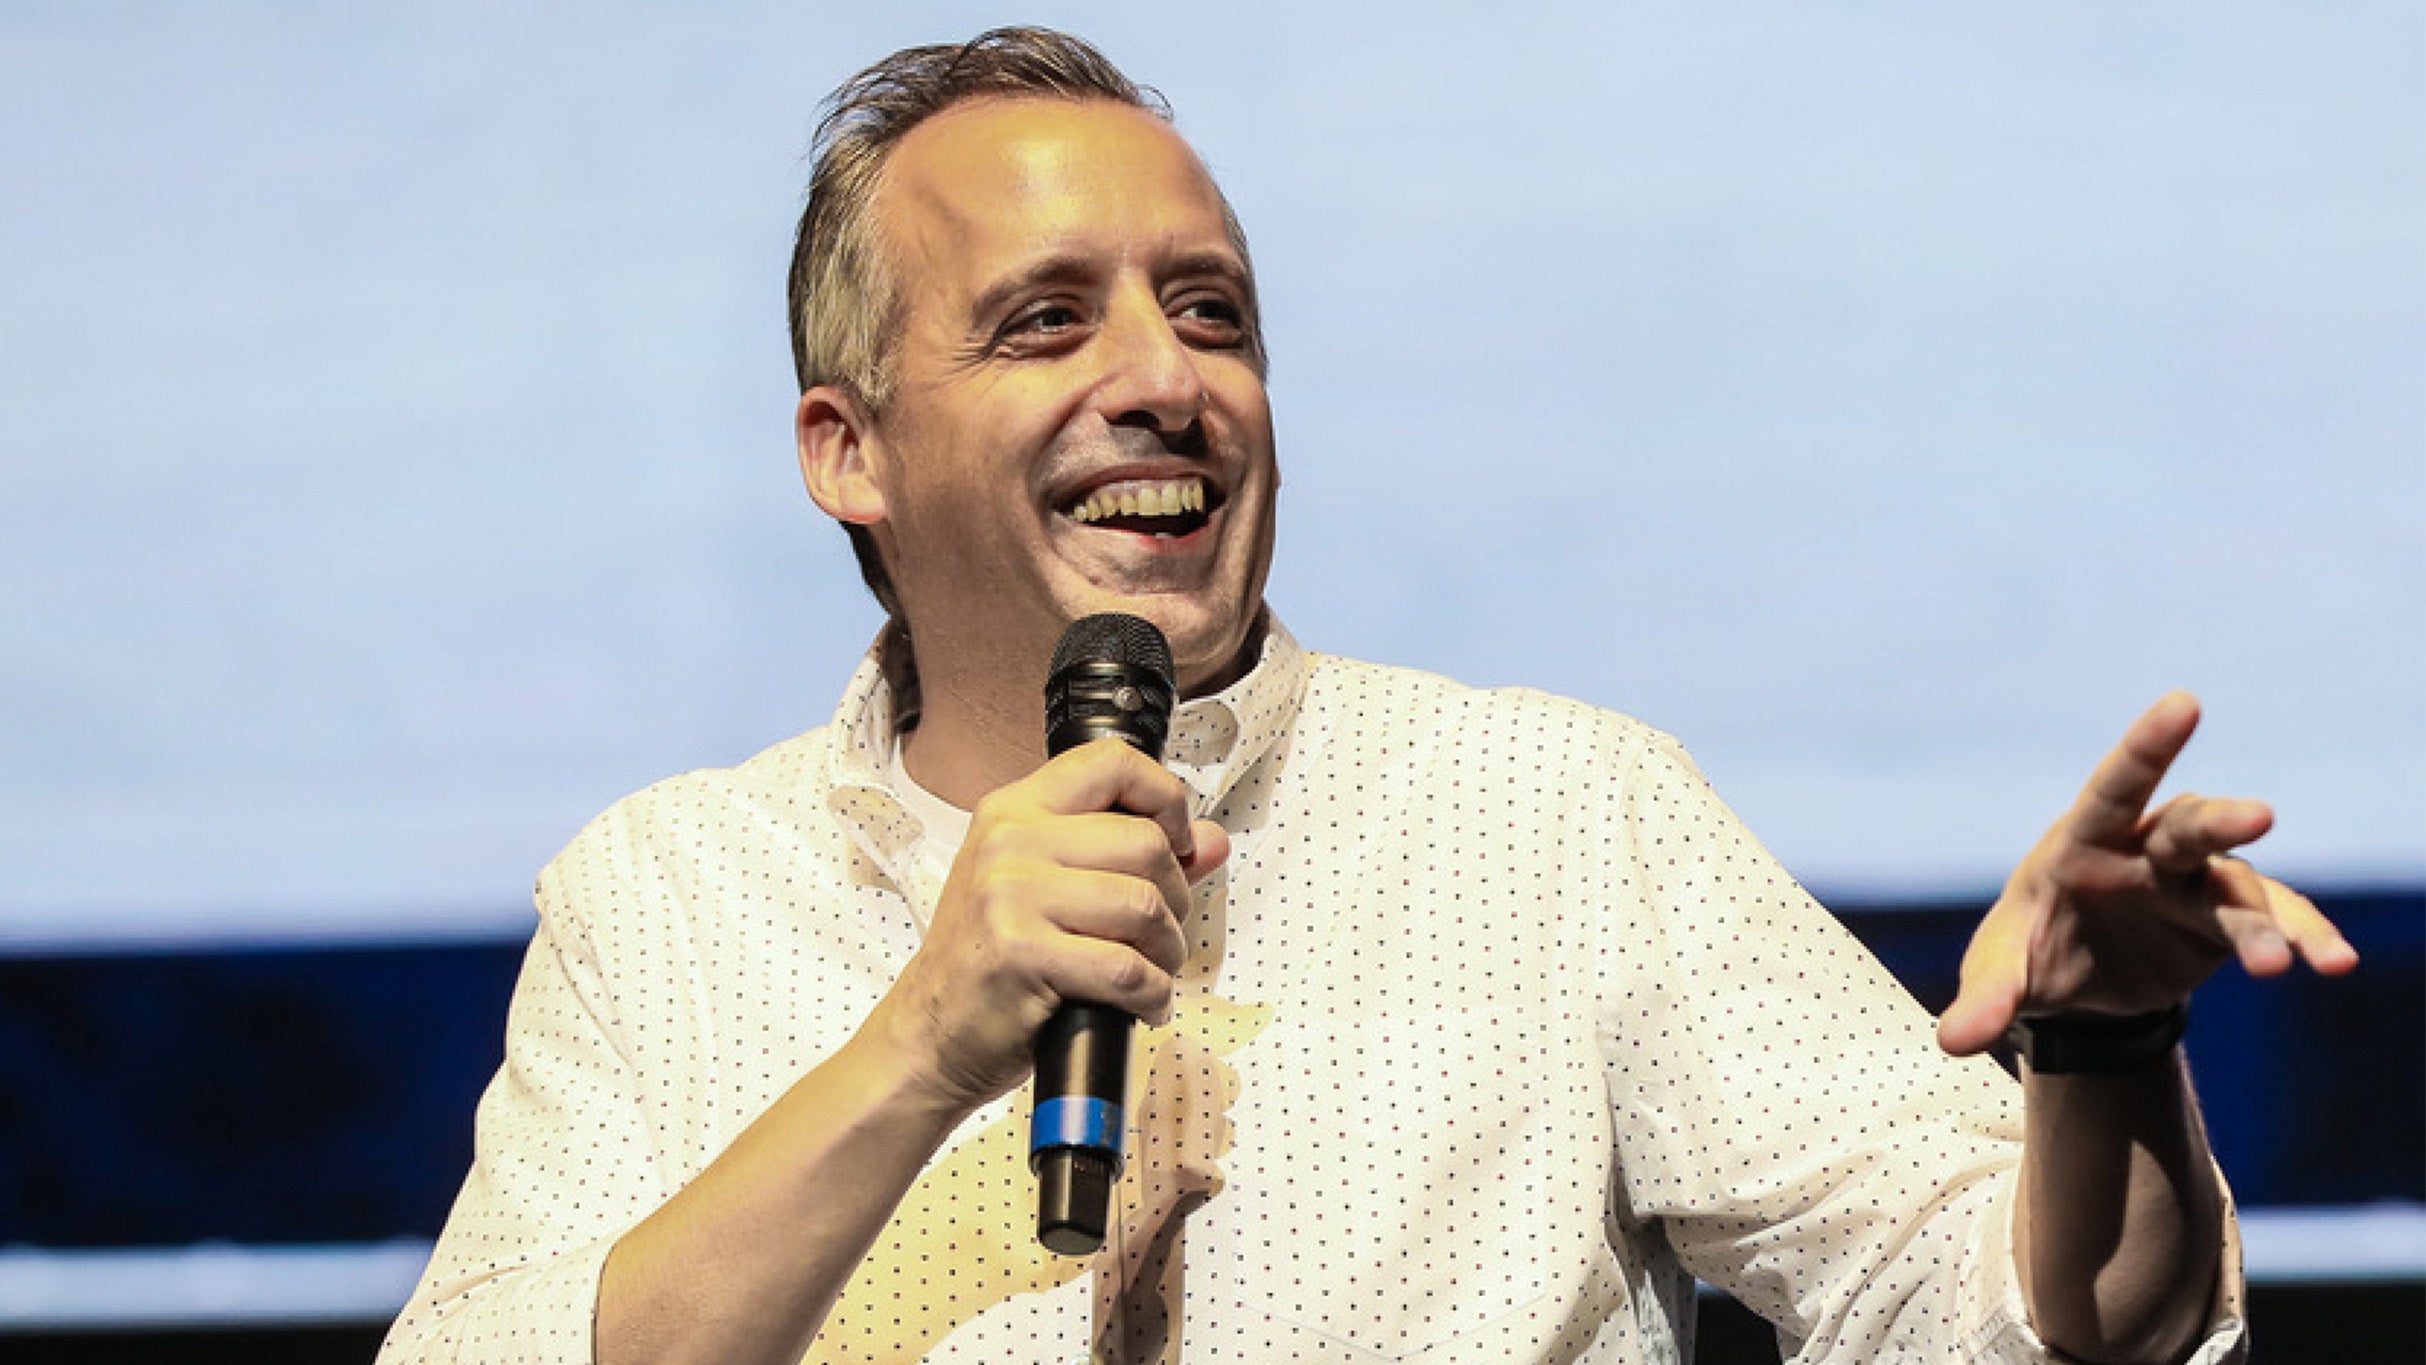 Joe Gatto's Night Of Comedy in Red Bank promo photo for Official Platinum presale offer code